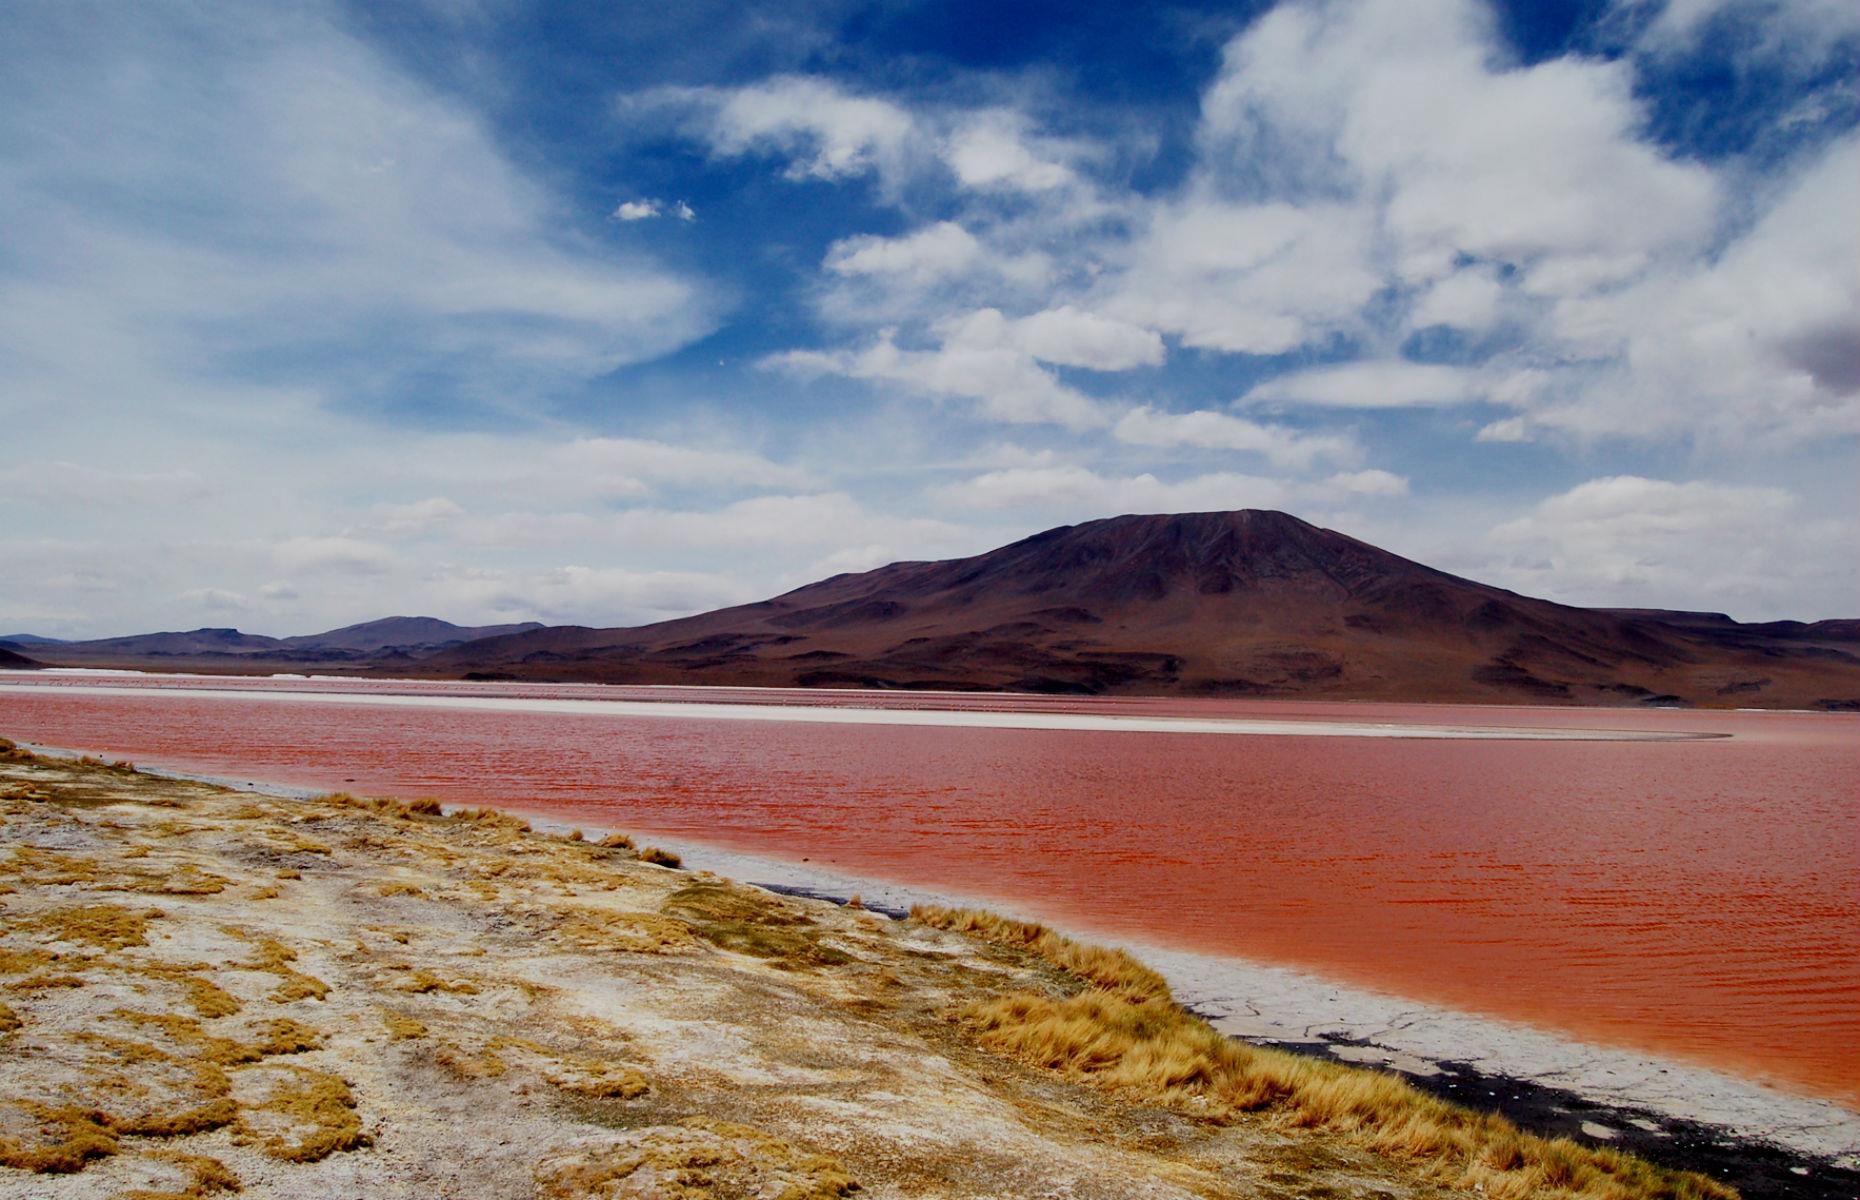 <p>Close to the borders with Chile and Argentina, and at Bolivia’s southernmost tip, you can see some of the planet’s most colorful, striking landscapes in the form of the fiery Laguna Colorado and the emerald Laguna Verde. Both aesthetic marvels, the lakes have turned their striking colors thanks to fortuitous geographical occurrences.</p>